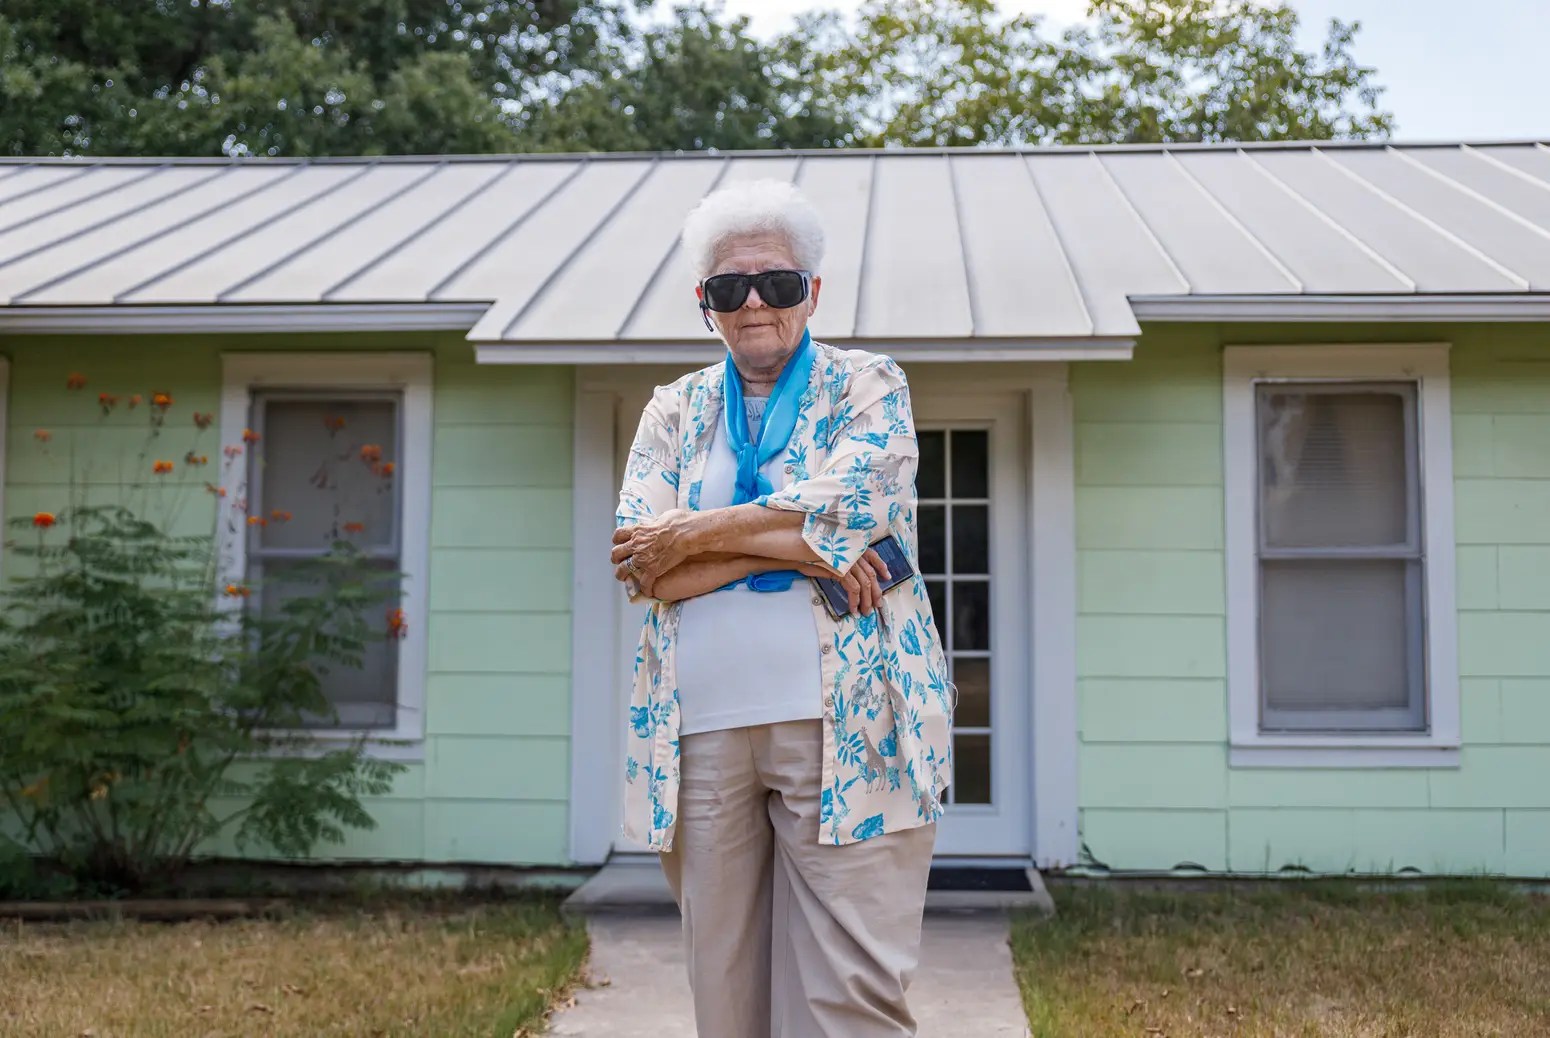 An older woman with white hair, slacks, and a colorful shirt and blue scarf and black sunglasses stands defiantly with her arms crossed in front of a green house.